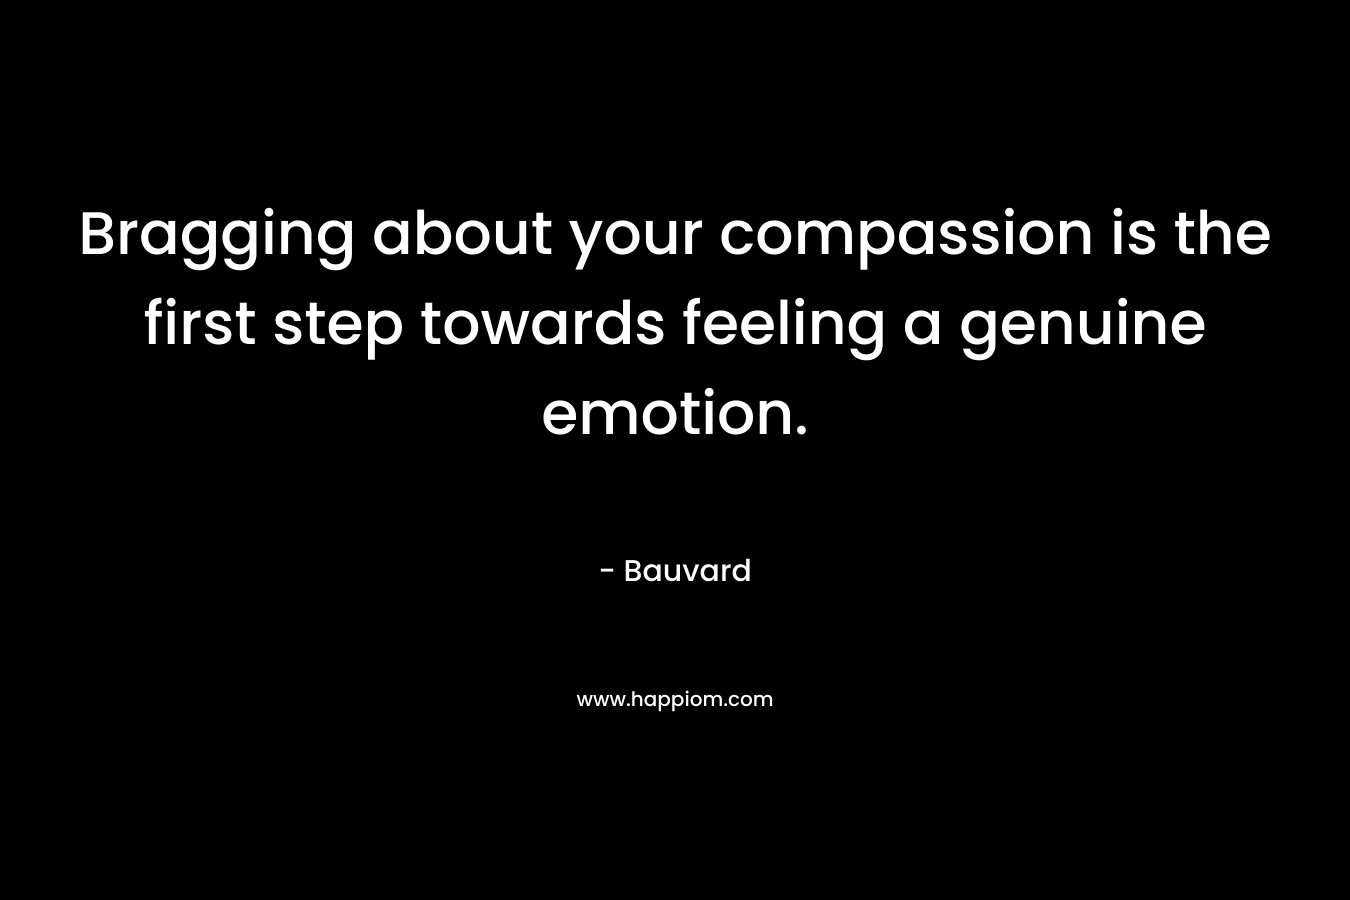 Bragging about your compassion is the first step towards feeling a genuine emotion. – Bauvard